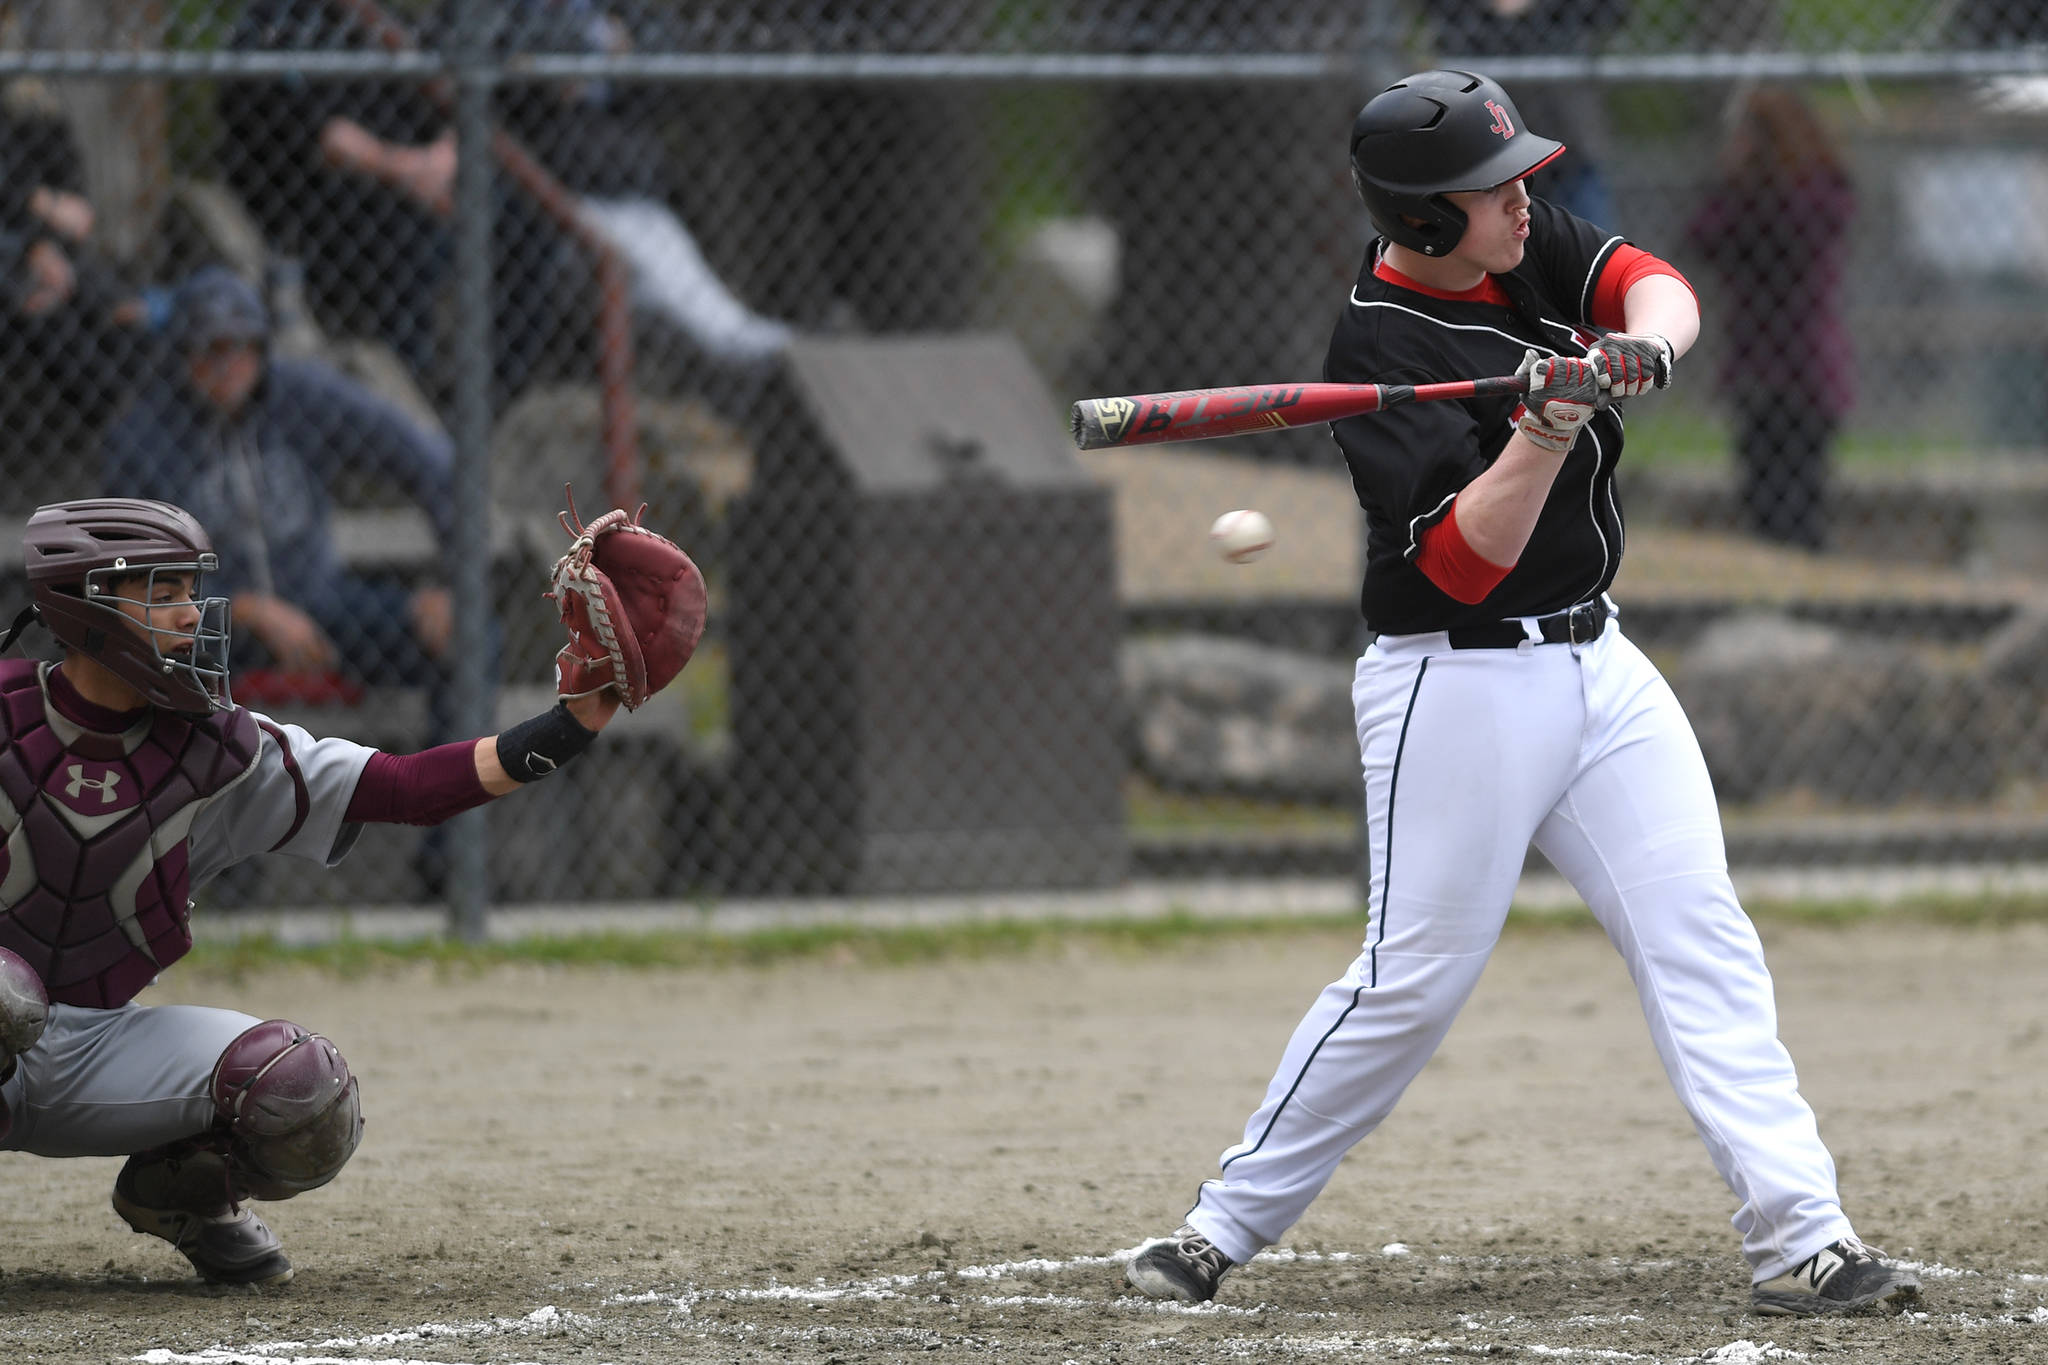 Juneau-Douglas’ Christian Ludeman is hit by a pitch against Ketchikan during the Region V Baseball Championship at Adair-Kennedy Memorial Park on Friday, May 24, 2019. (Michael Penn | Juneau Empire)